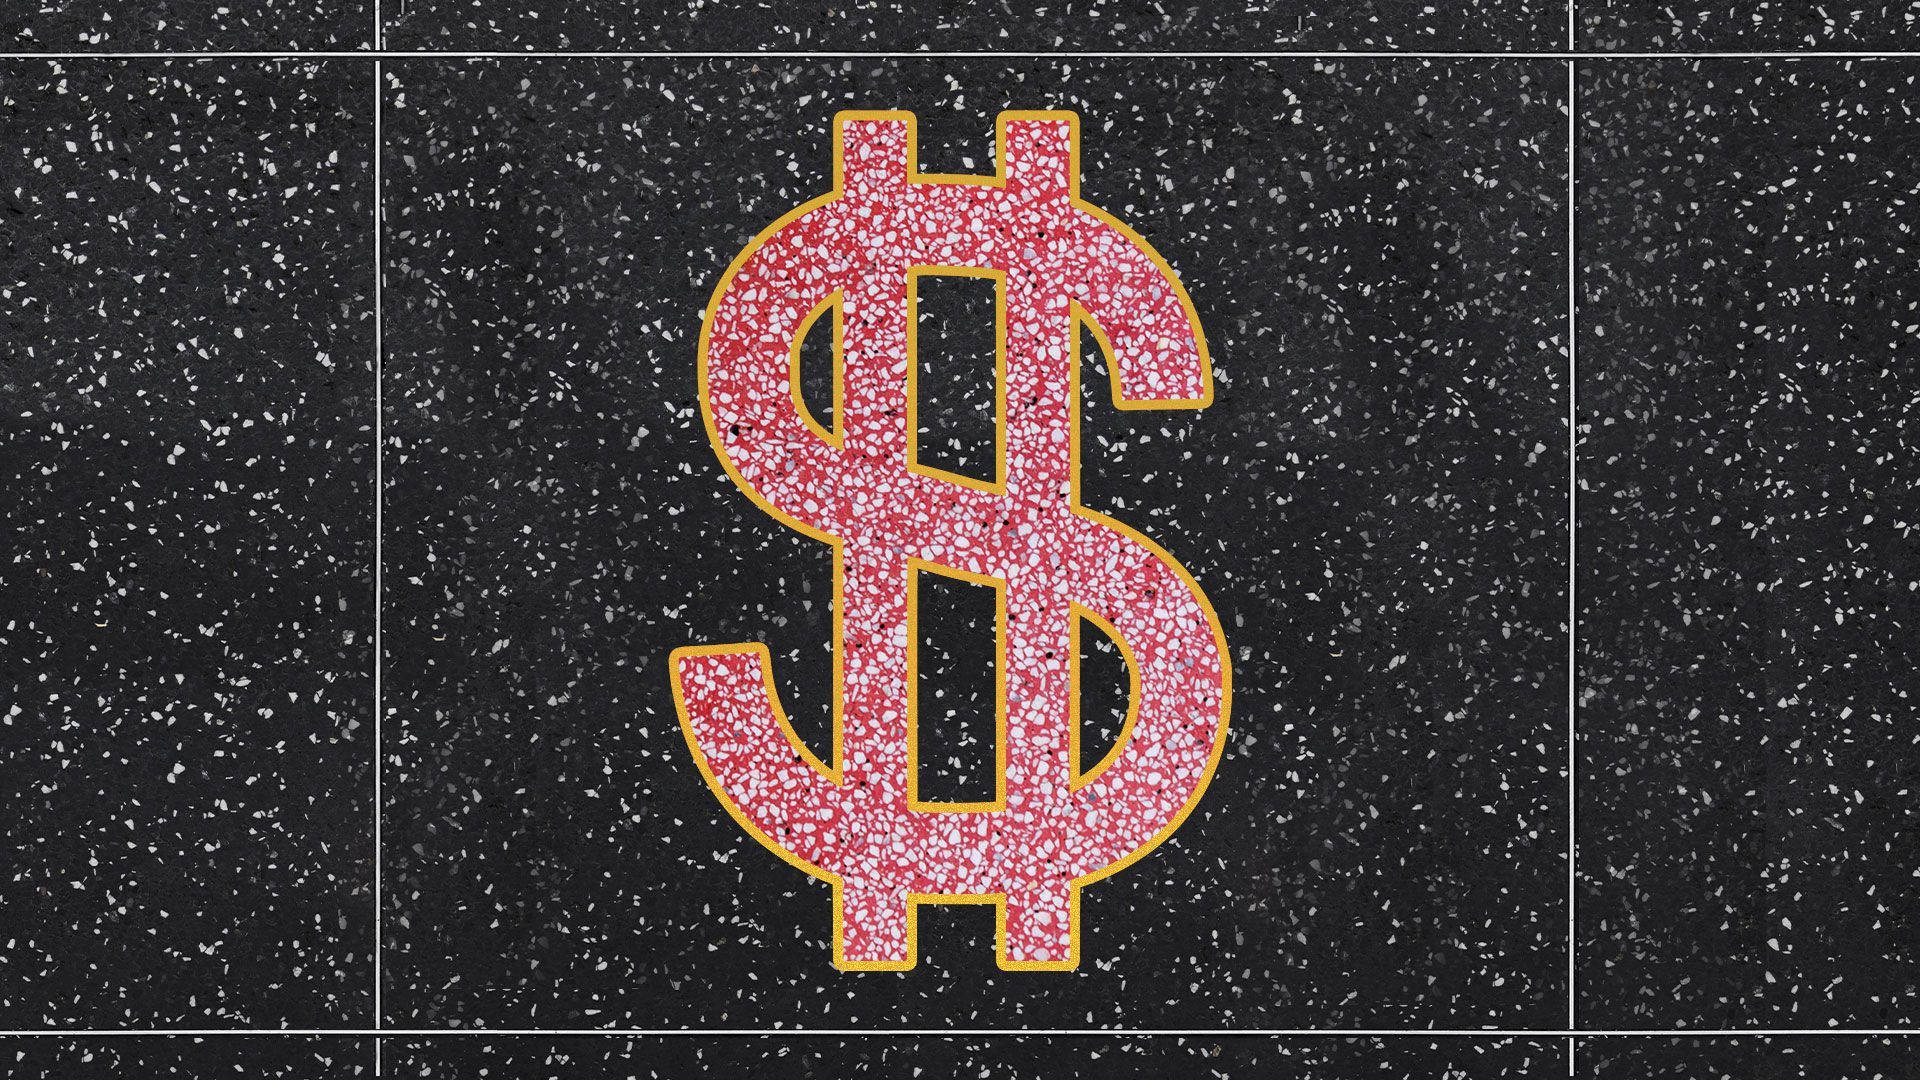 Illustration of a dollar sign in the style of a Hollywood Walk of Fame star